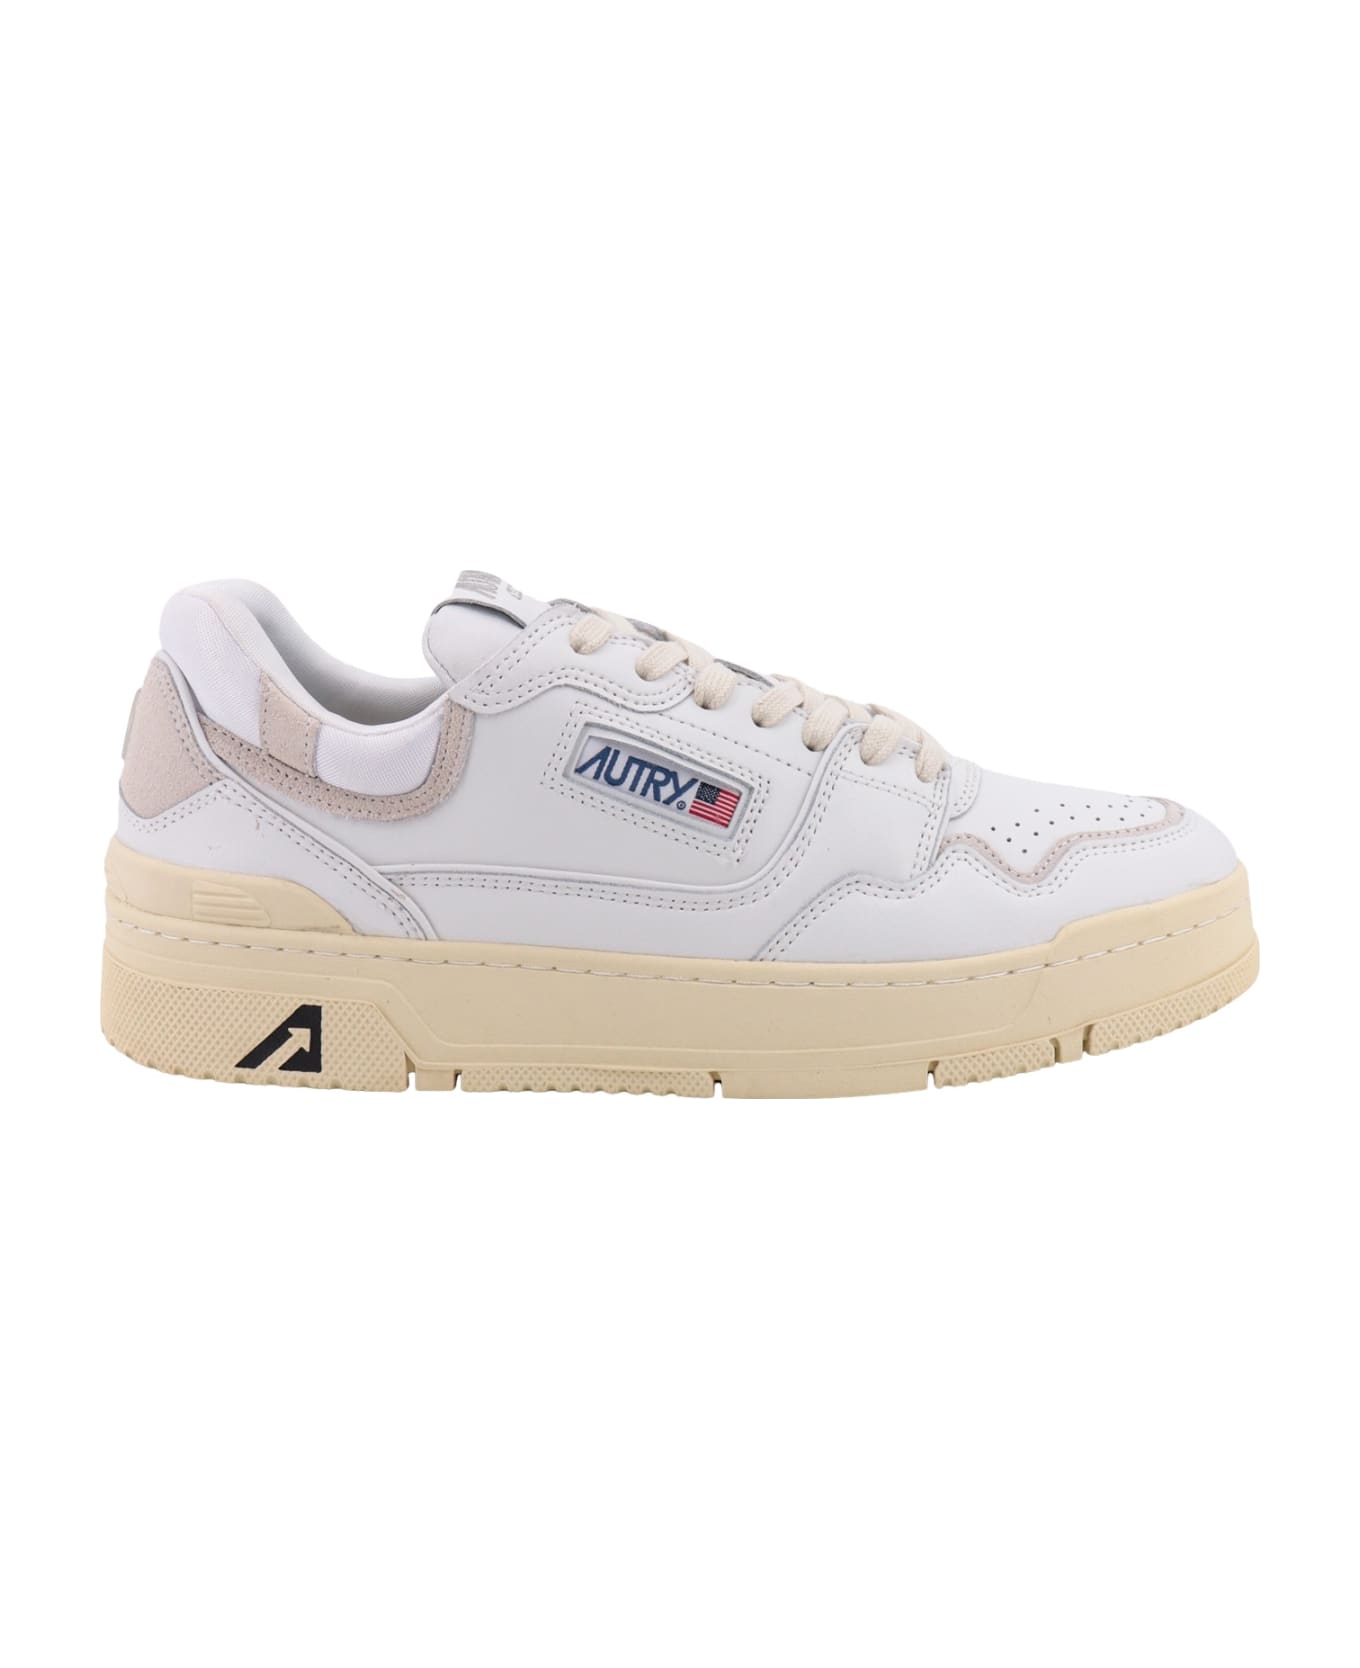 Autry Rookie Low Sneakers - White スニーカー